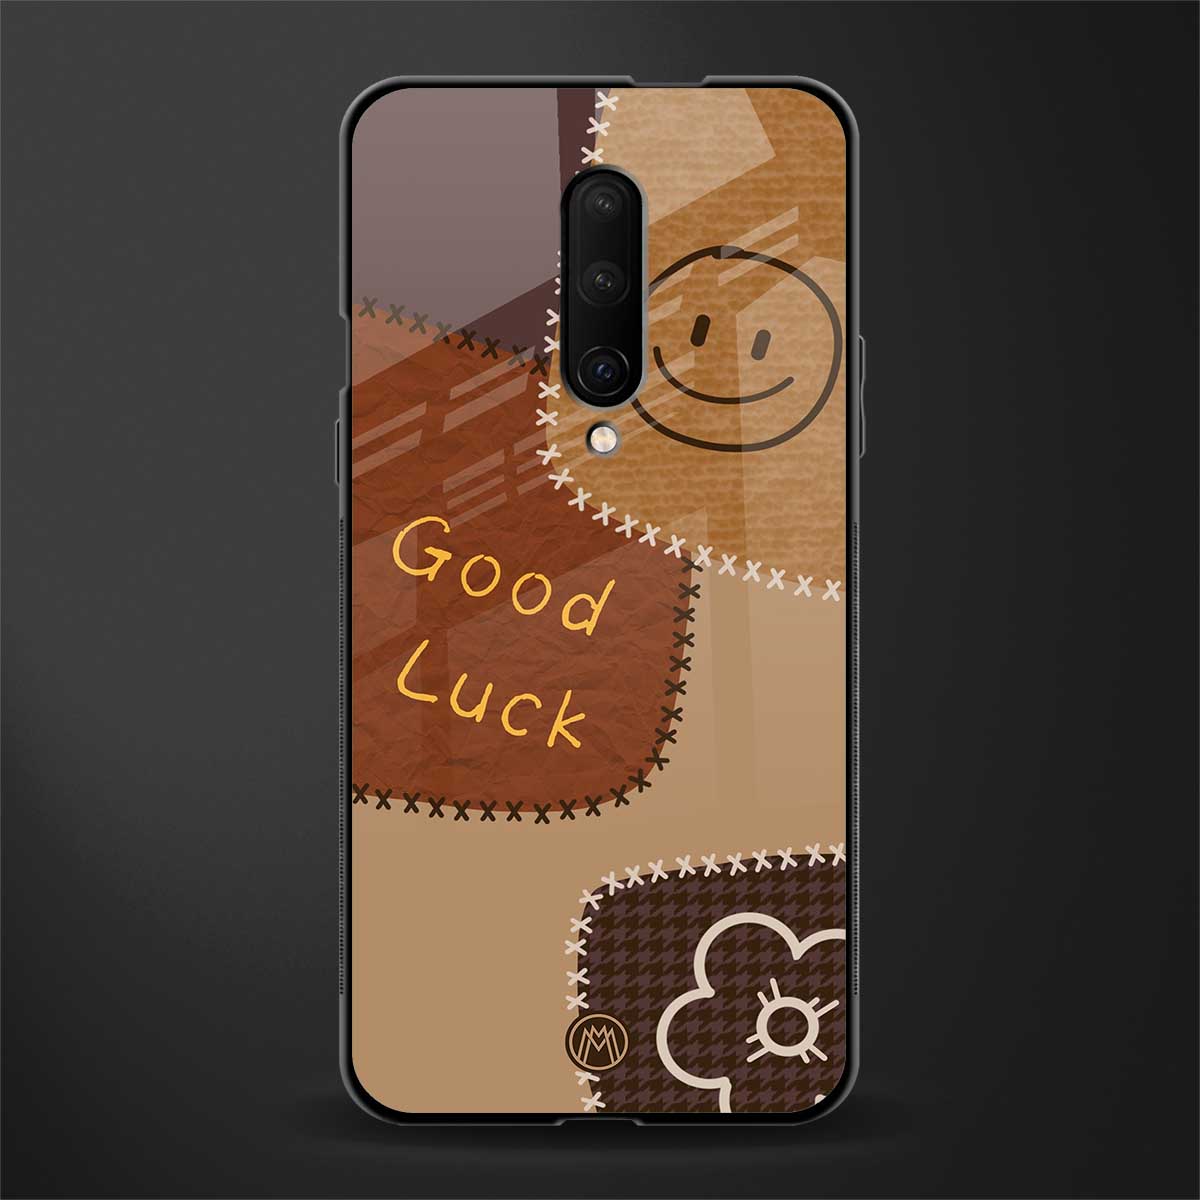 good luck glass case for oneplus 7 pro image